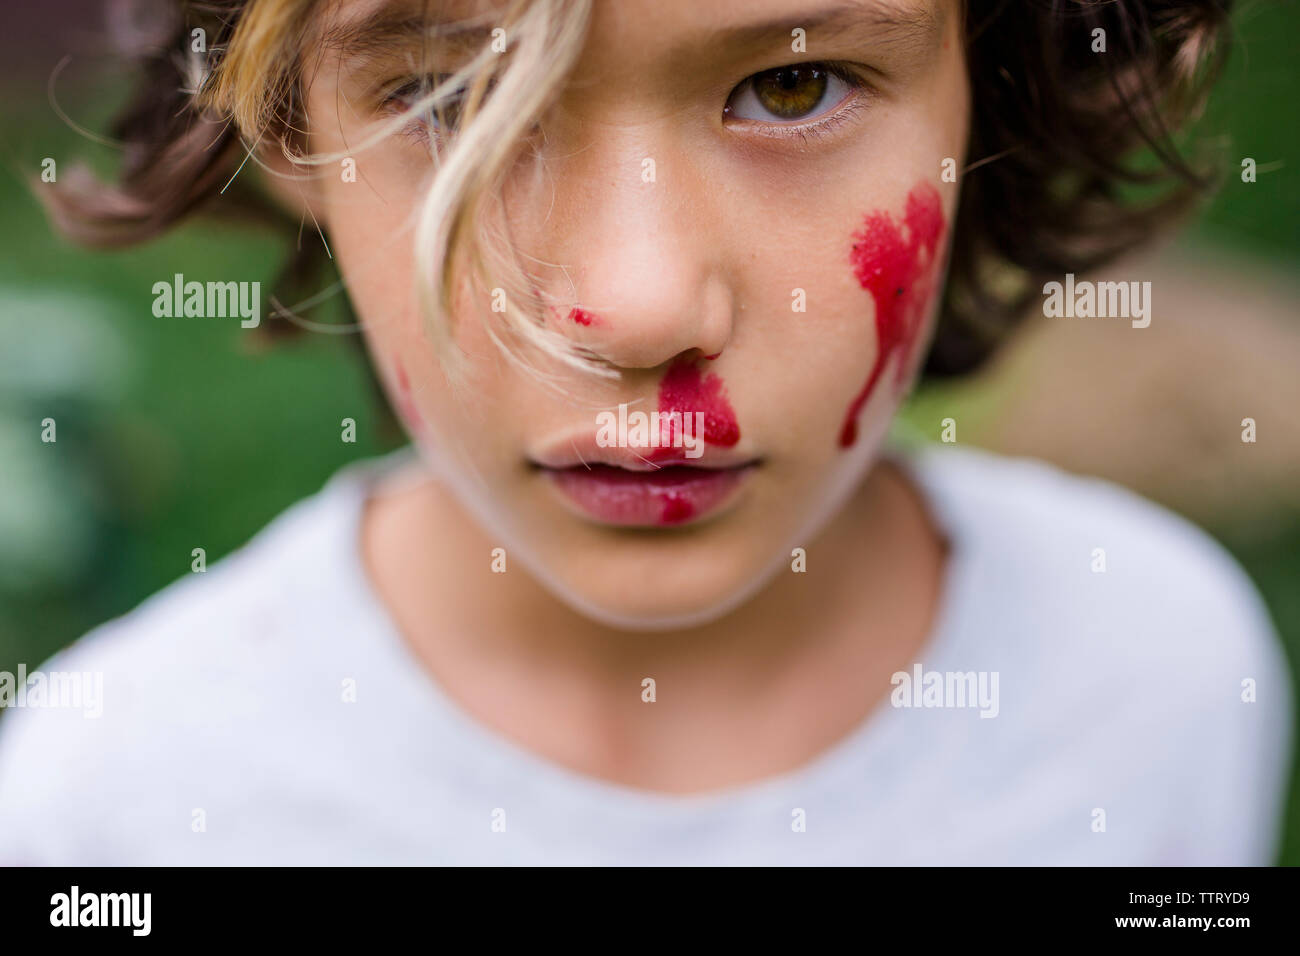 Close-up portrait of cute boy with red face paint standing in park Stock Photo